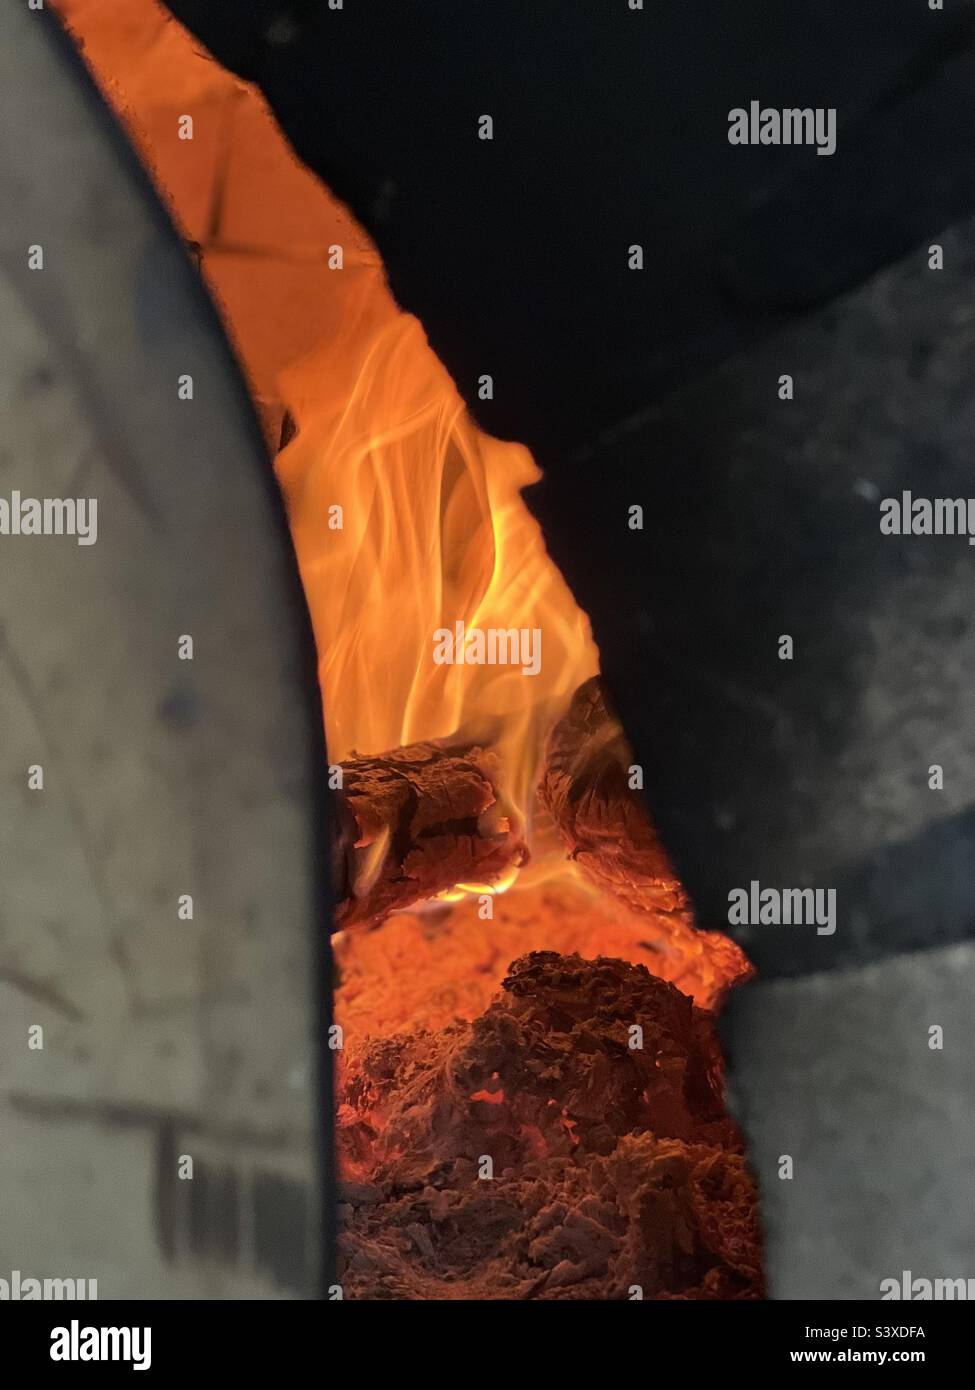 Fire in brick oven Stock Photo